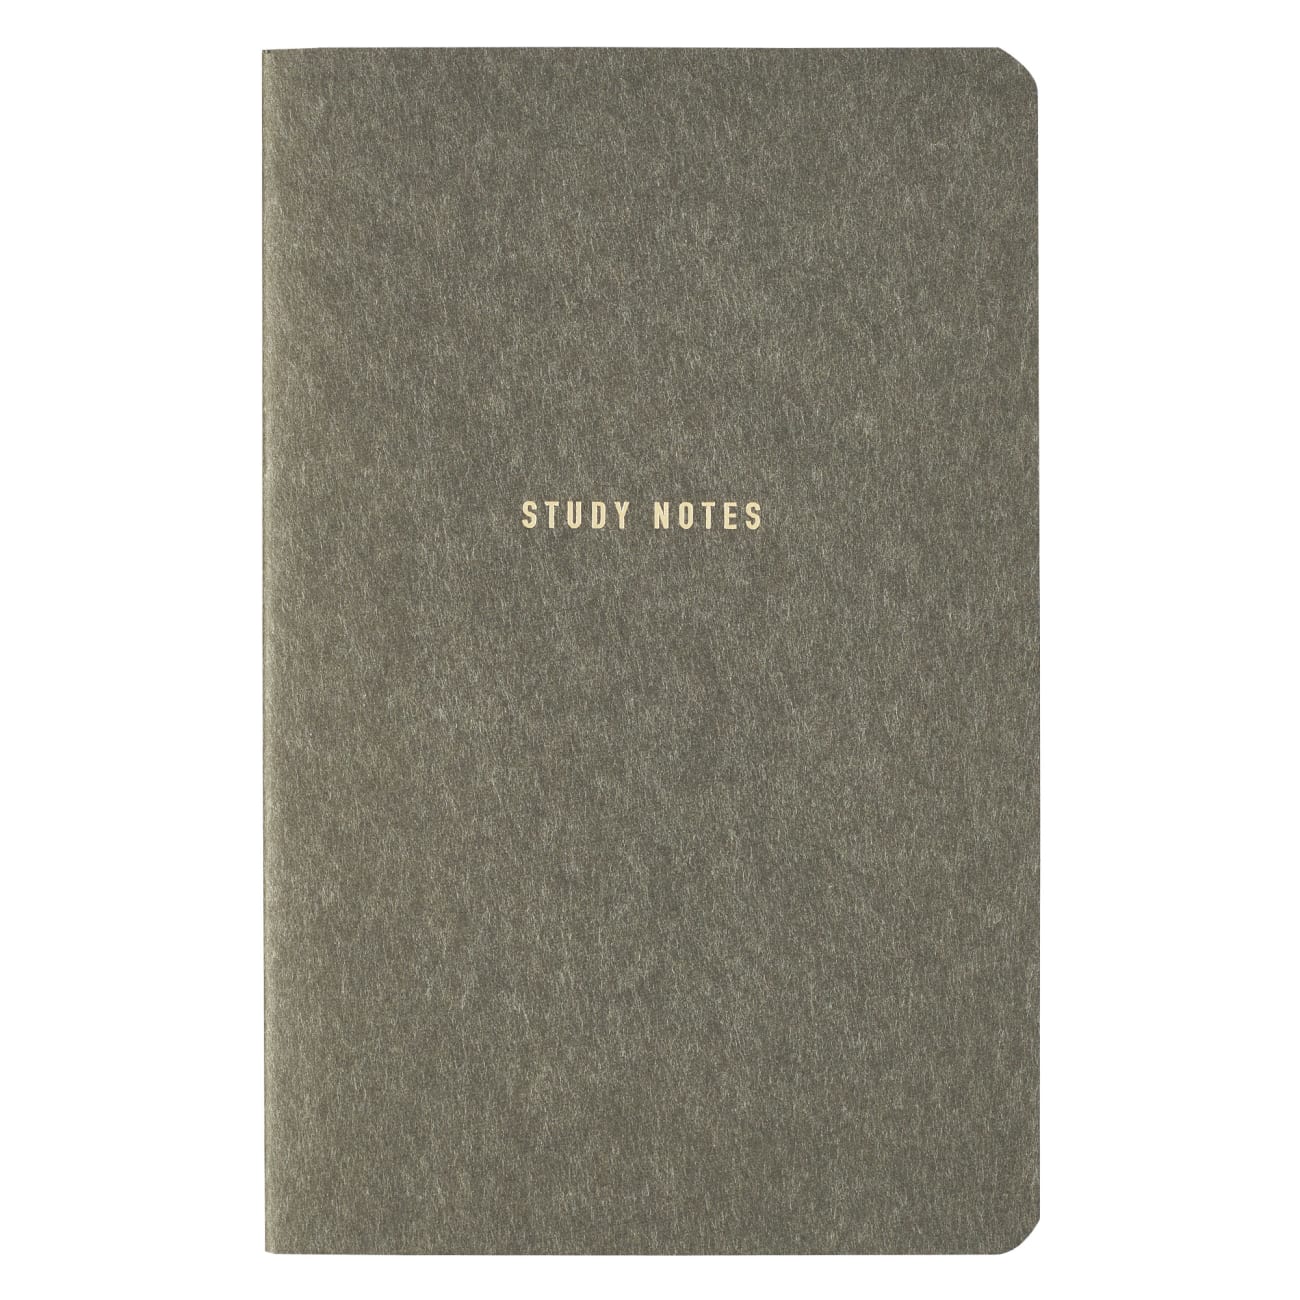 Bible Study Notebook - Notebook For Bible Study Kits - Paperback